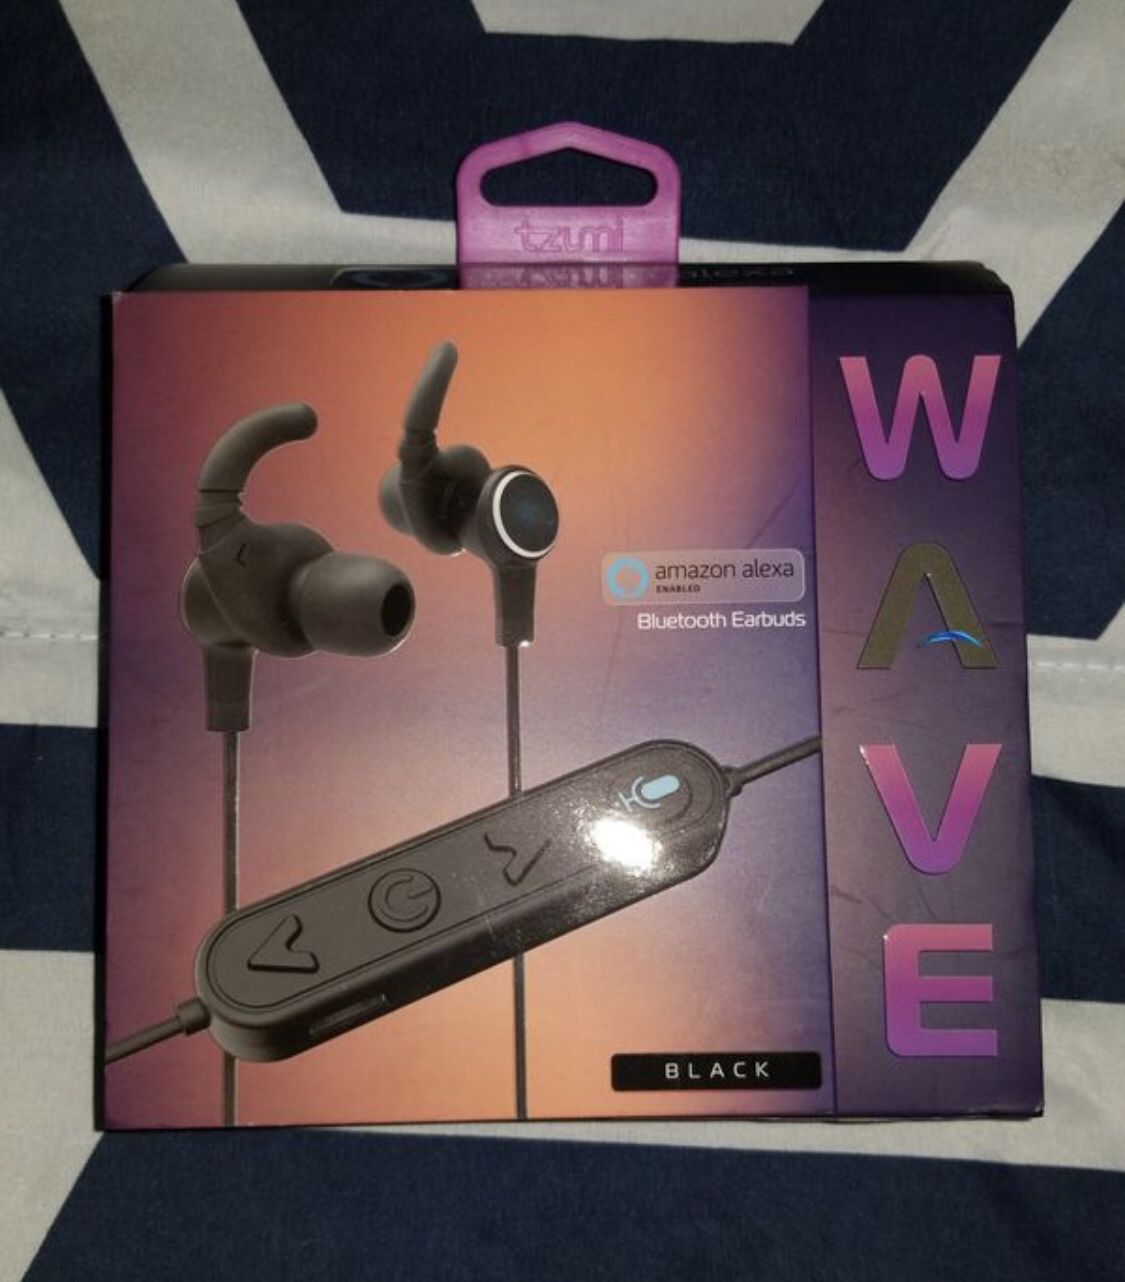 Amazon Wave Bluetooth Earbuds (Black) - New & Sealed!